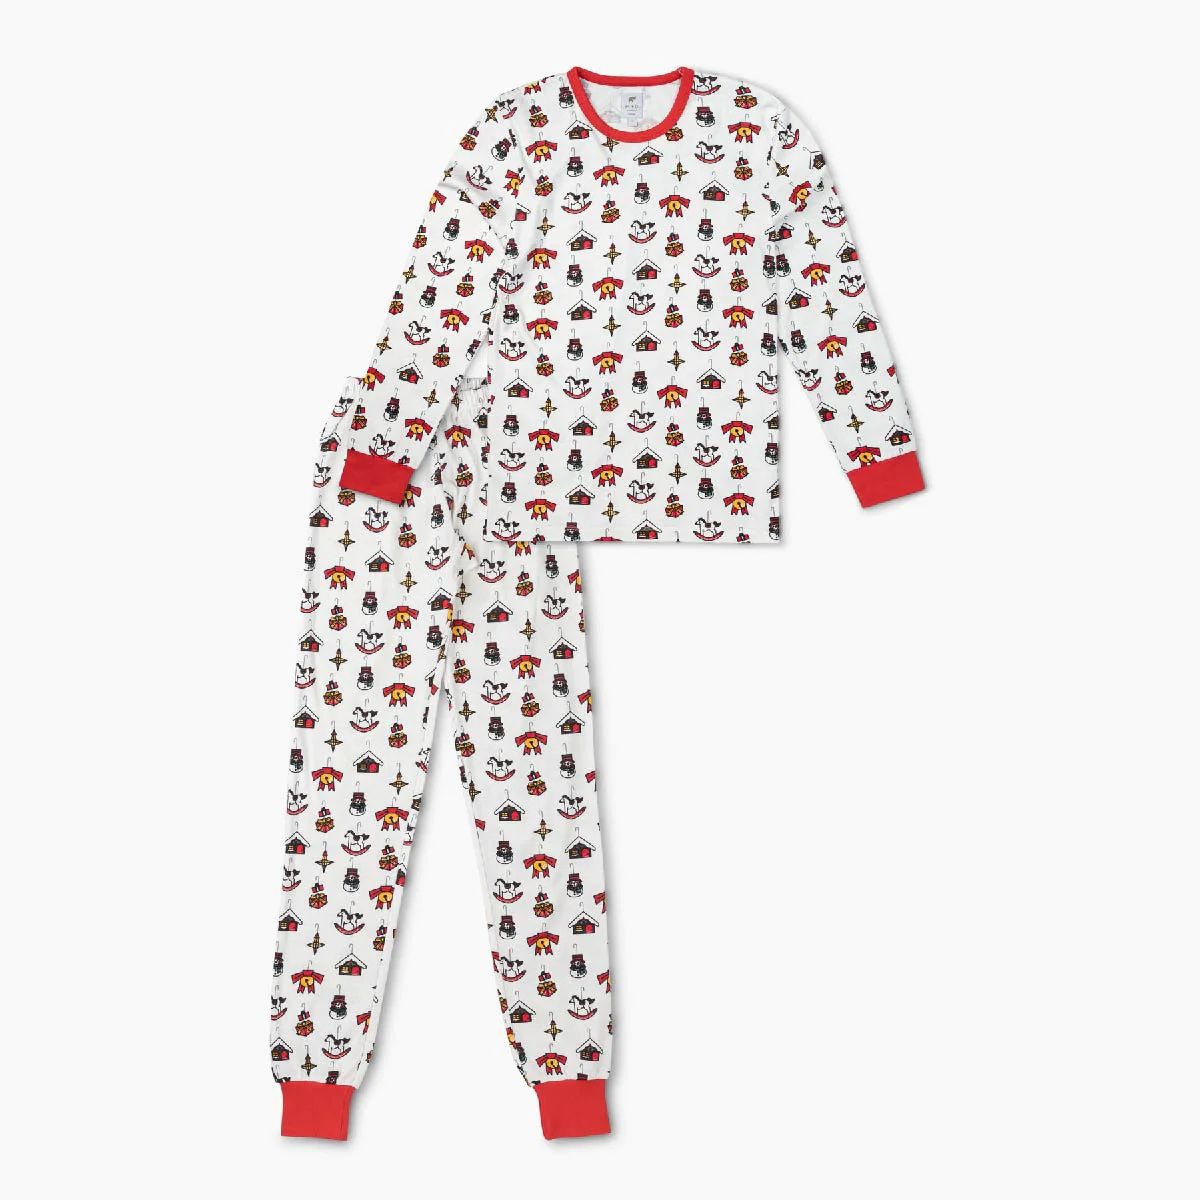 Monica + Andy - Matching Family Two-Piece Pajama Set | Monica + Andy